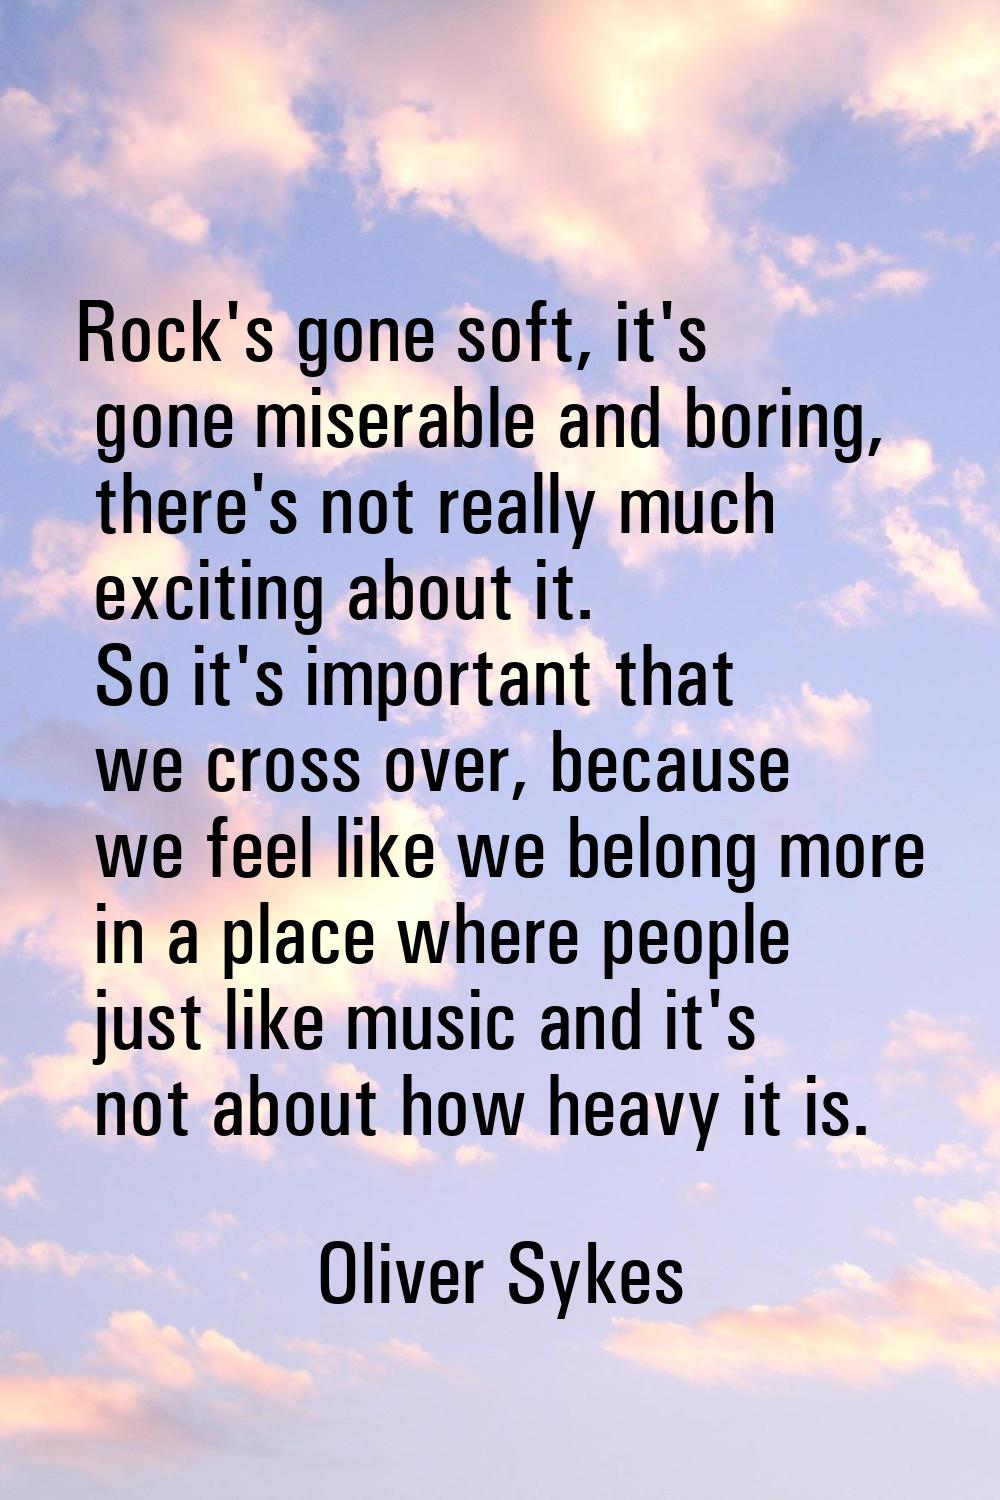 Rock's gone soft, it's gone miserable and boring, there's not really much exciting about it. So it'